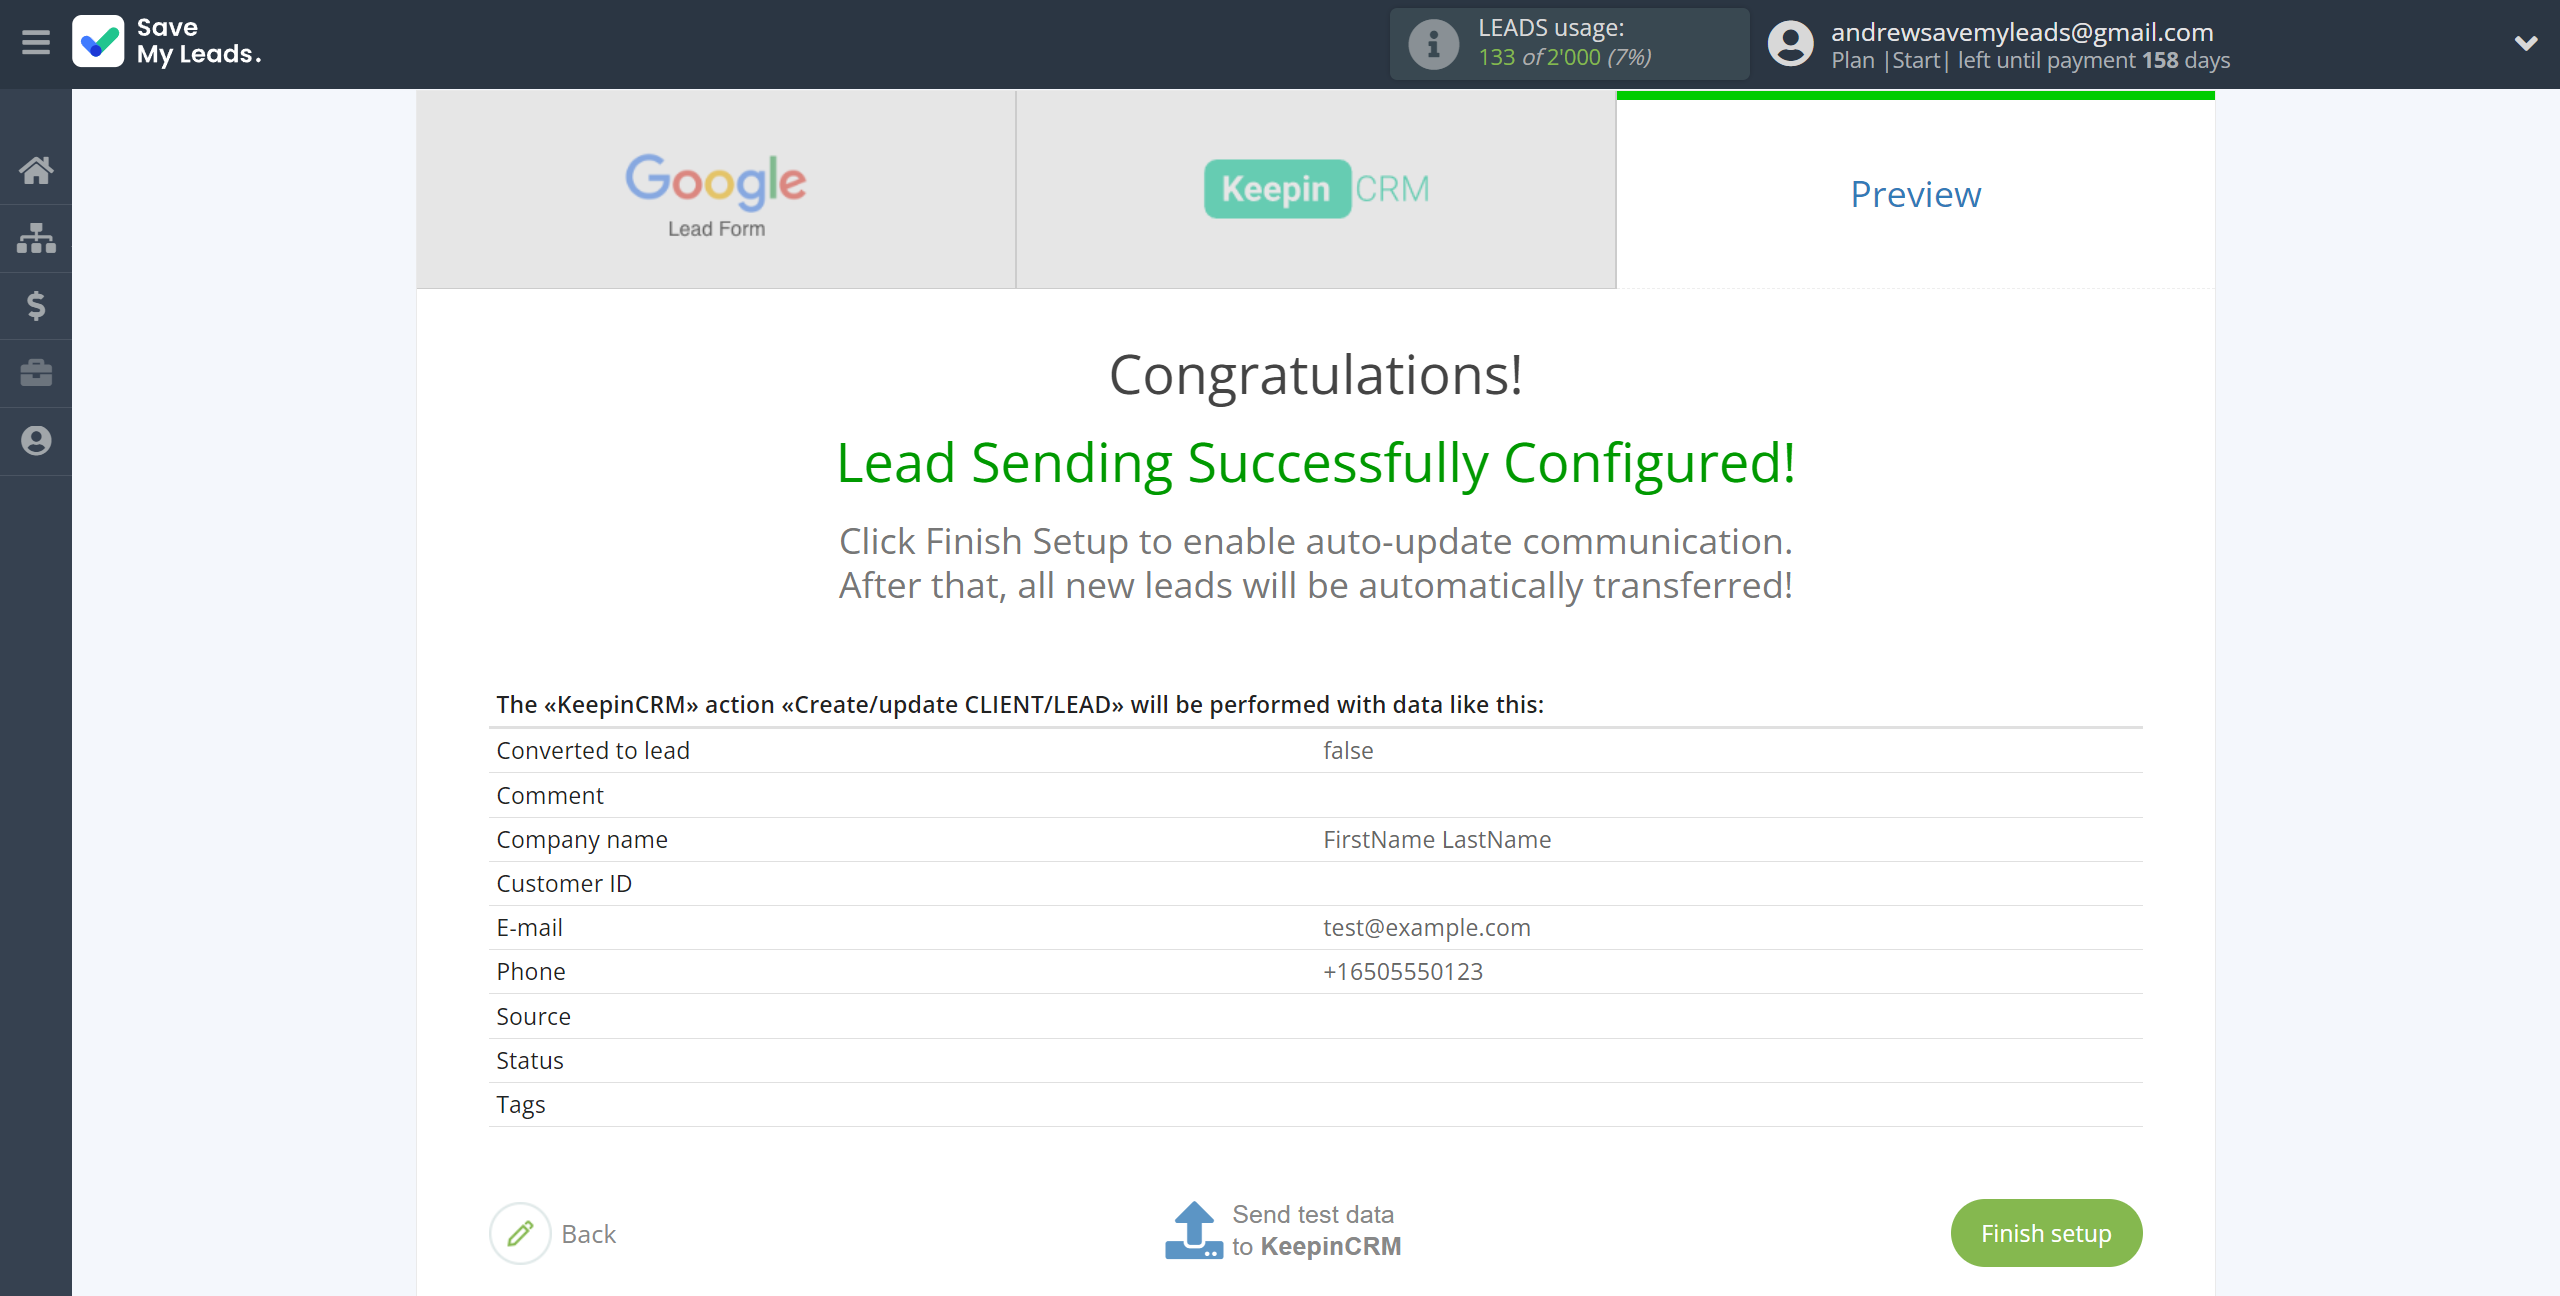 How to Connect Google Lead Form with KeepinCRM Create/update Client/Lead | Test data